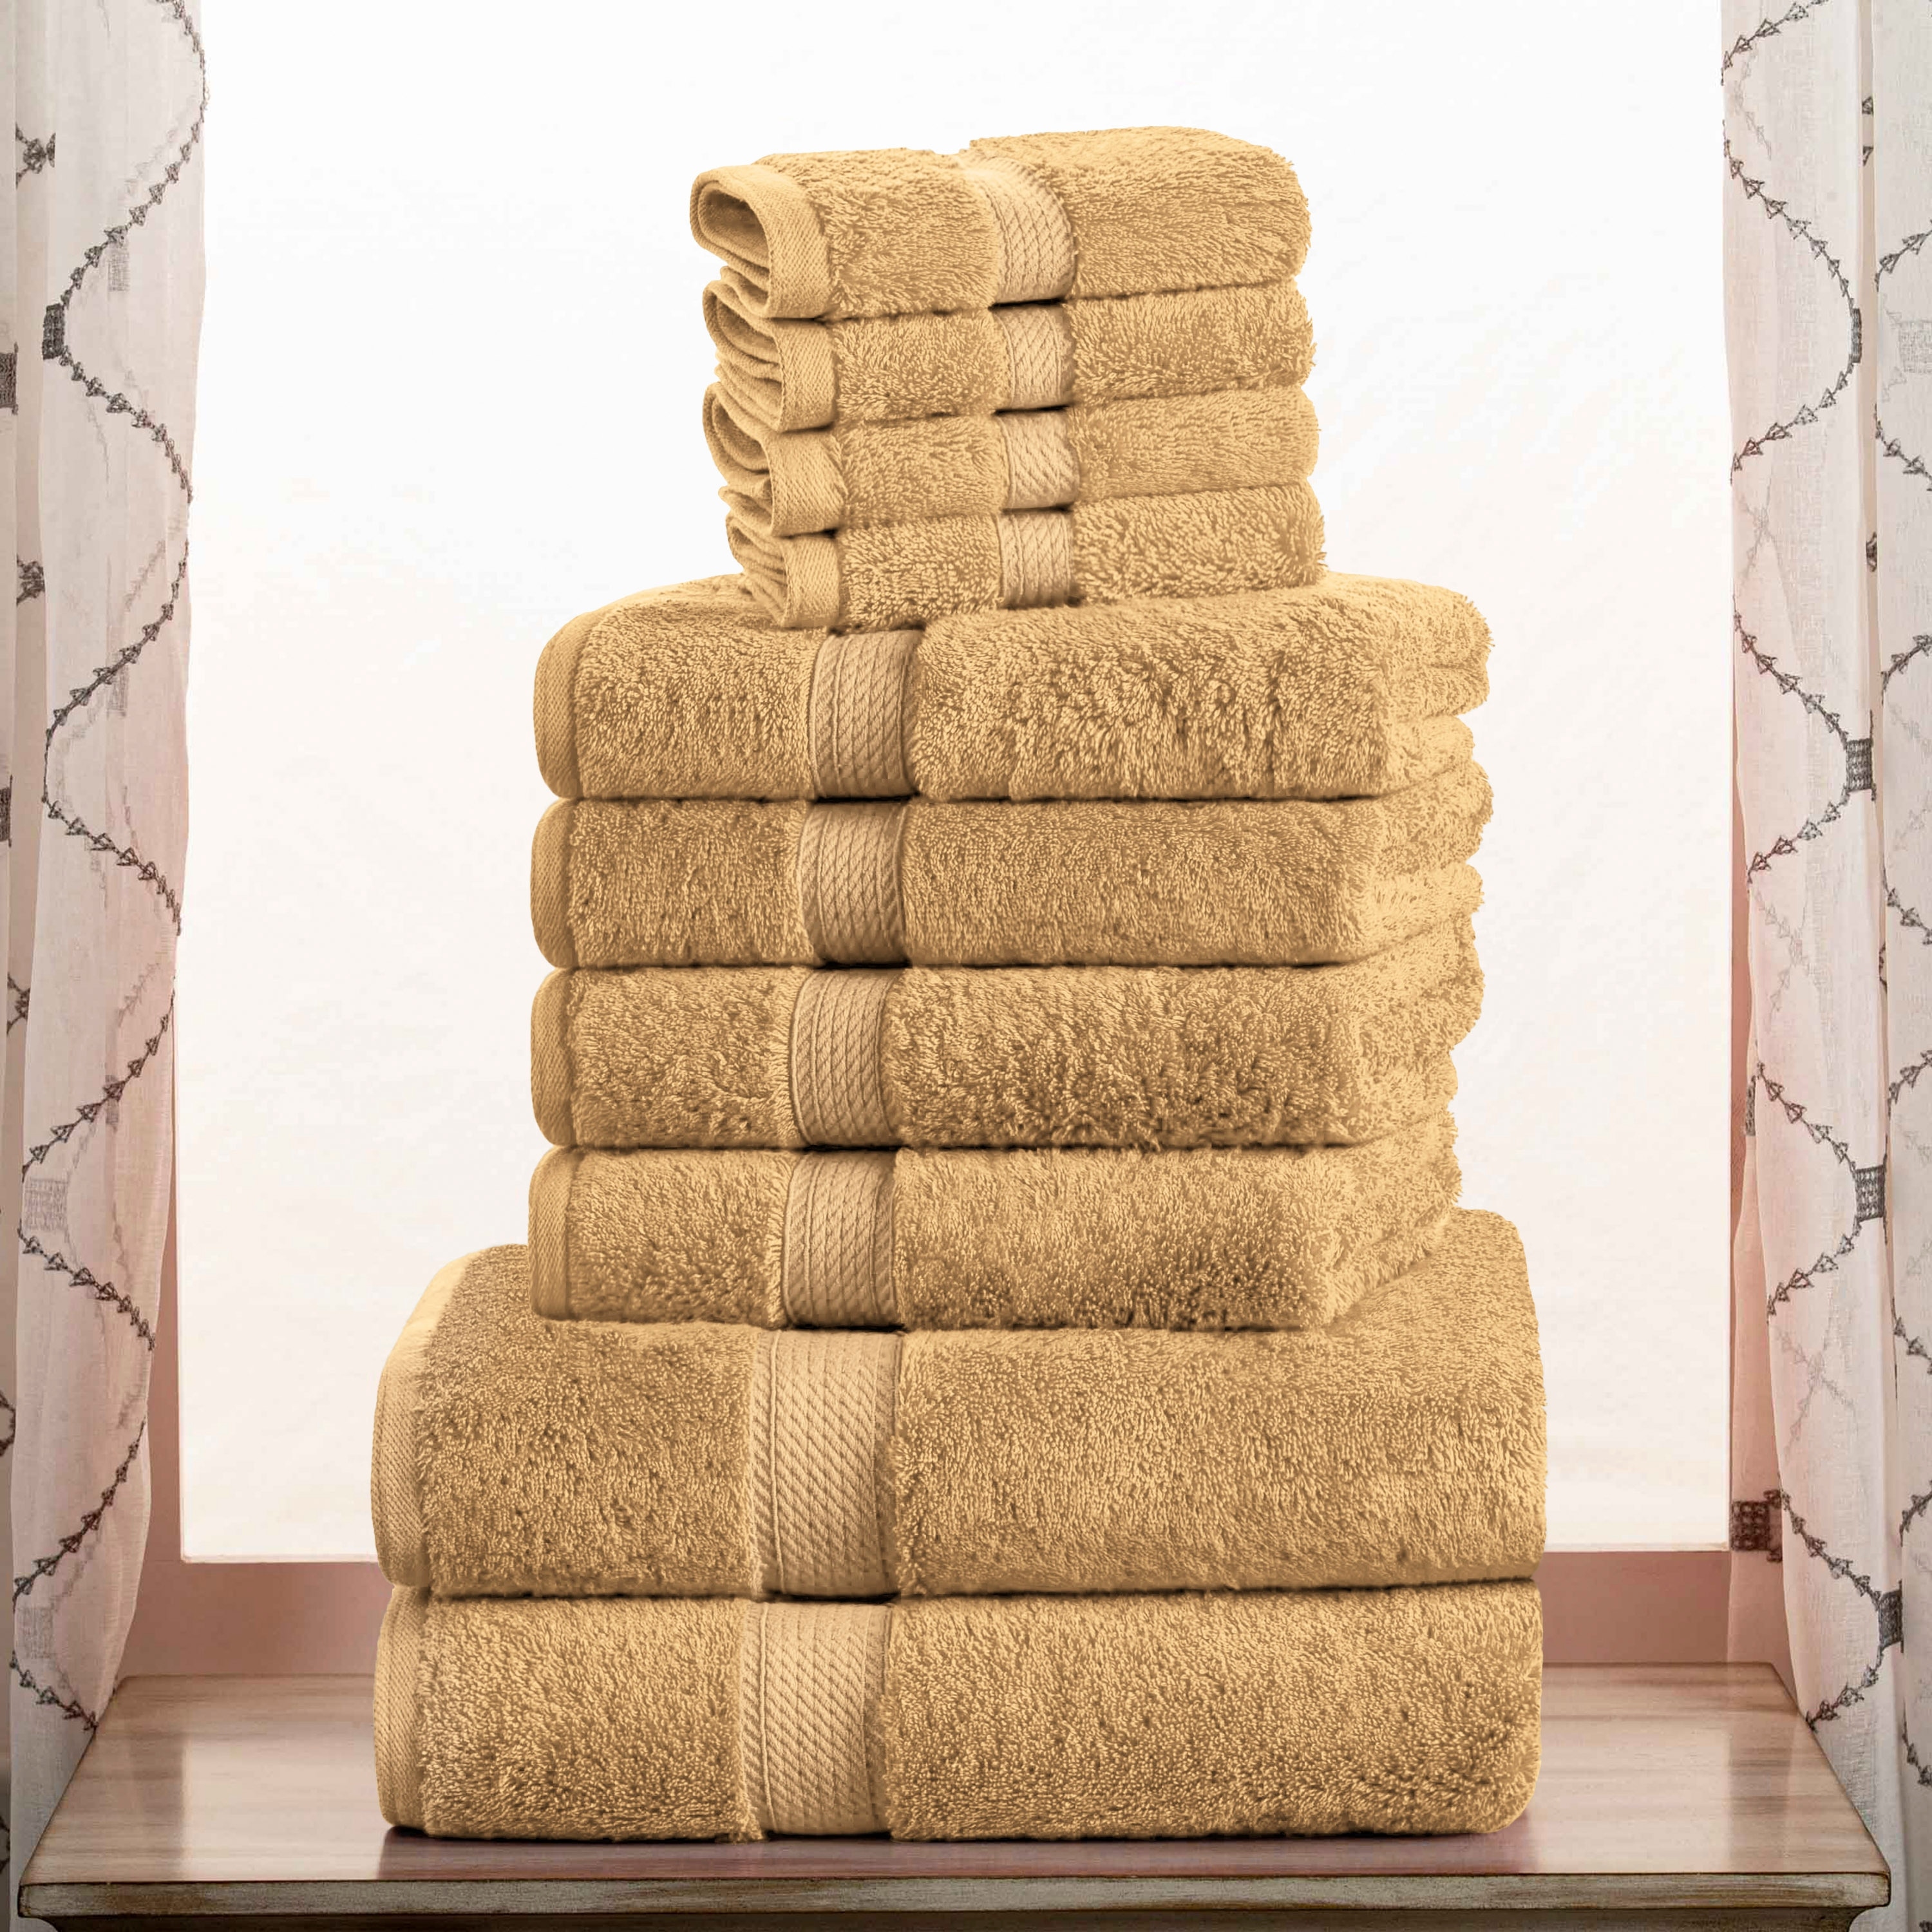 https://ak1.ostkcdn.com/images/products/is/images/direct/46476835f0c416891c7a2c9b4561794a77968feb/Egyptian-Cotton-Heavyweight-Solid-Plush-Towel-Set-by-Superior.jpg